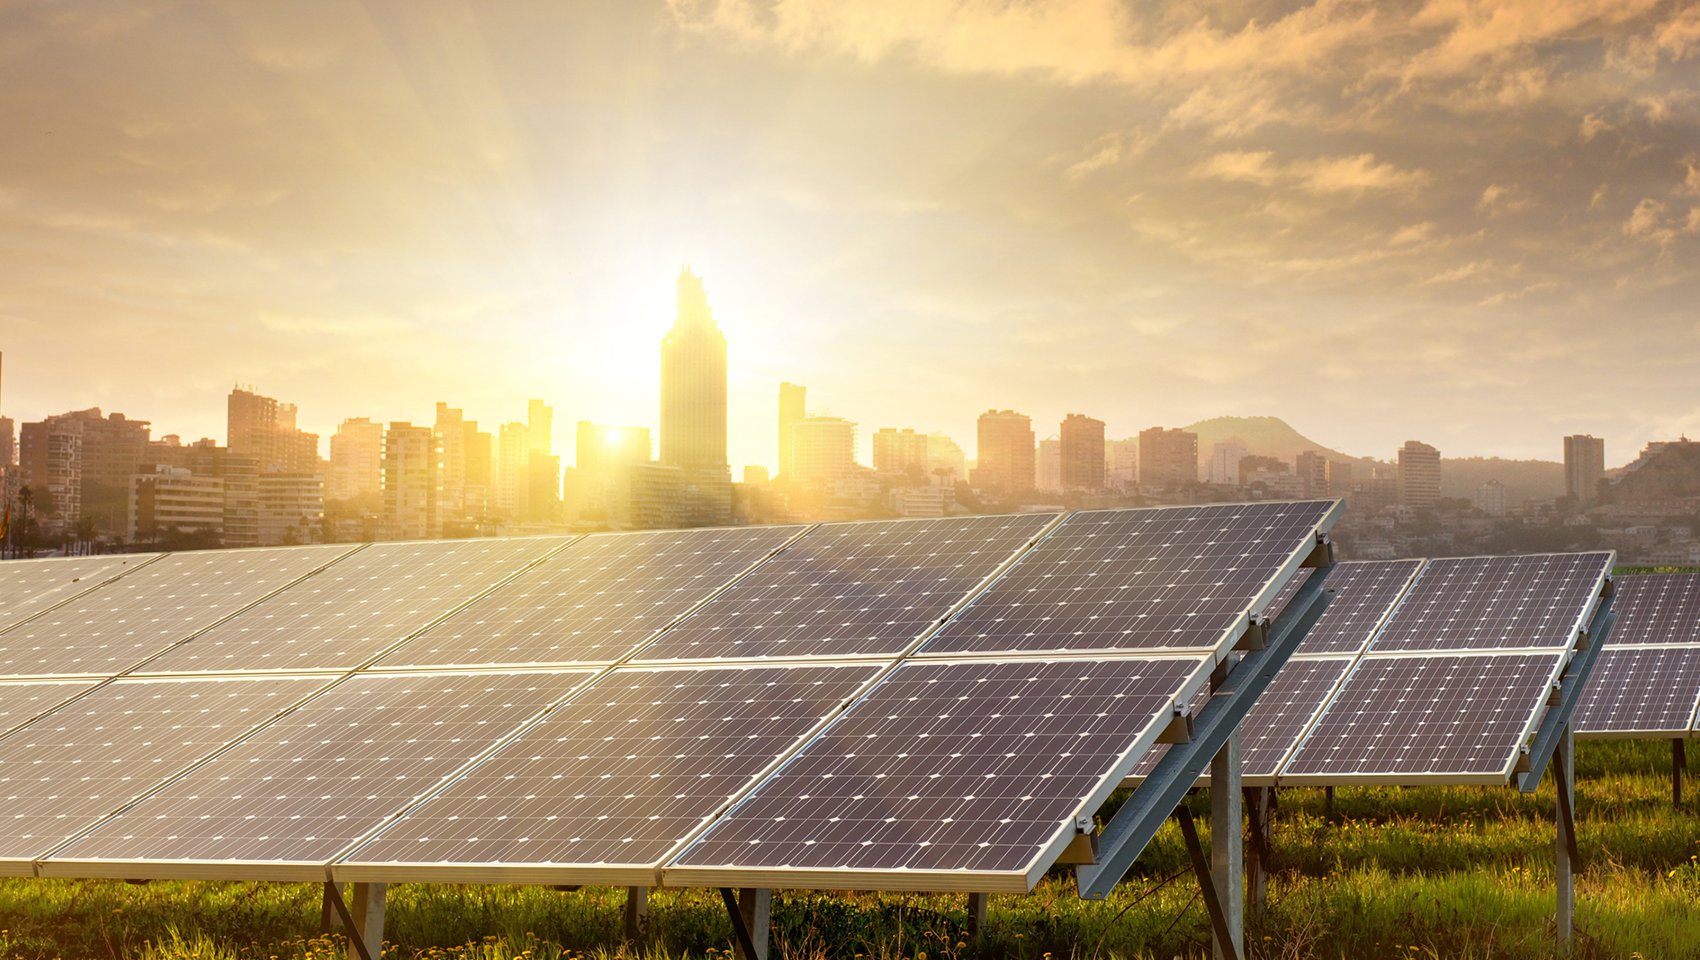 solar panels in a filed with city skyline in the background and sun shinin